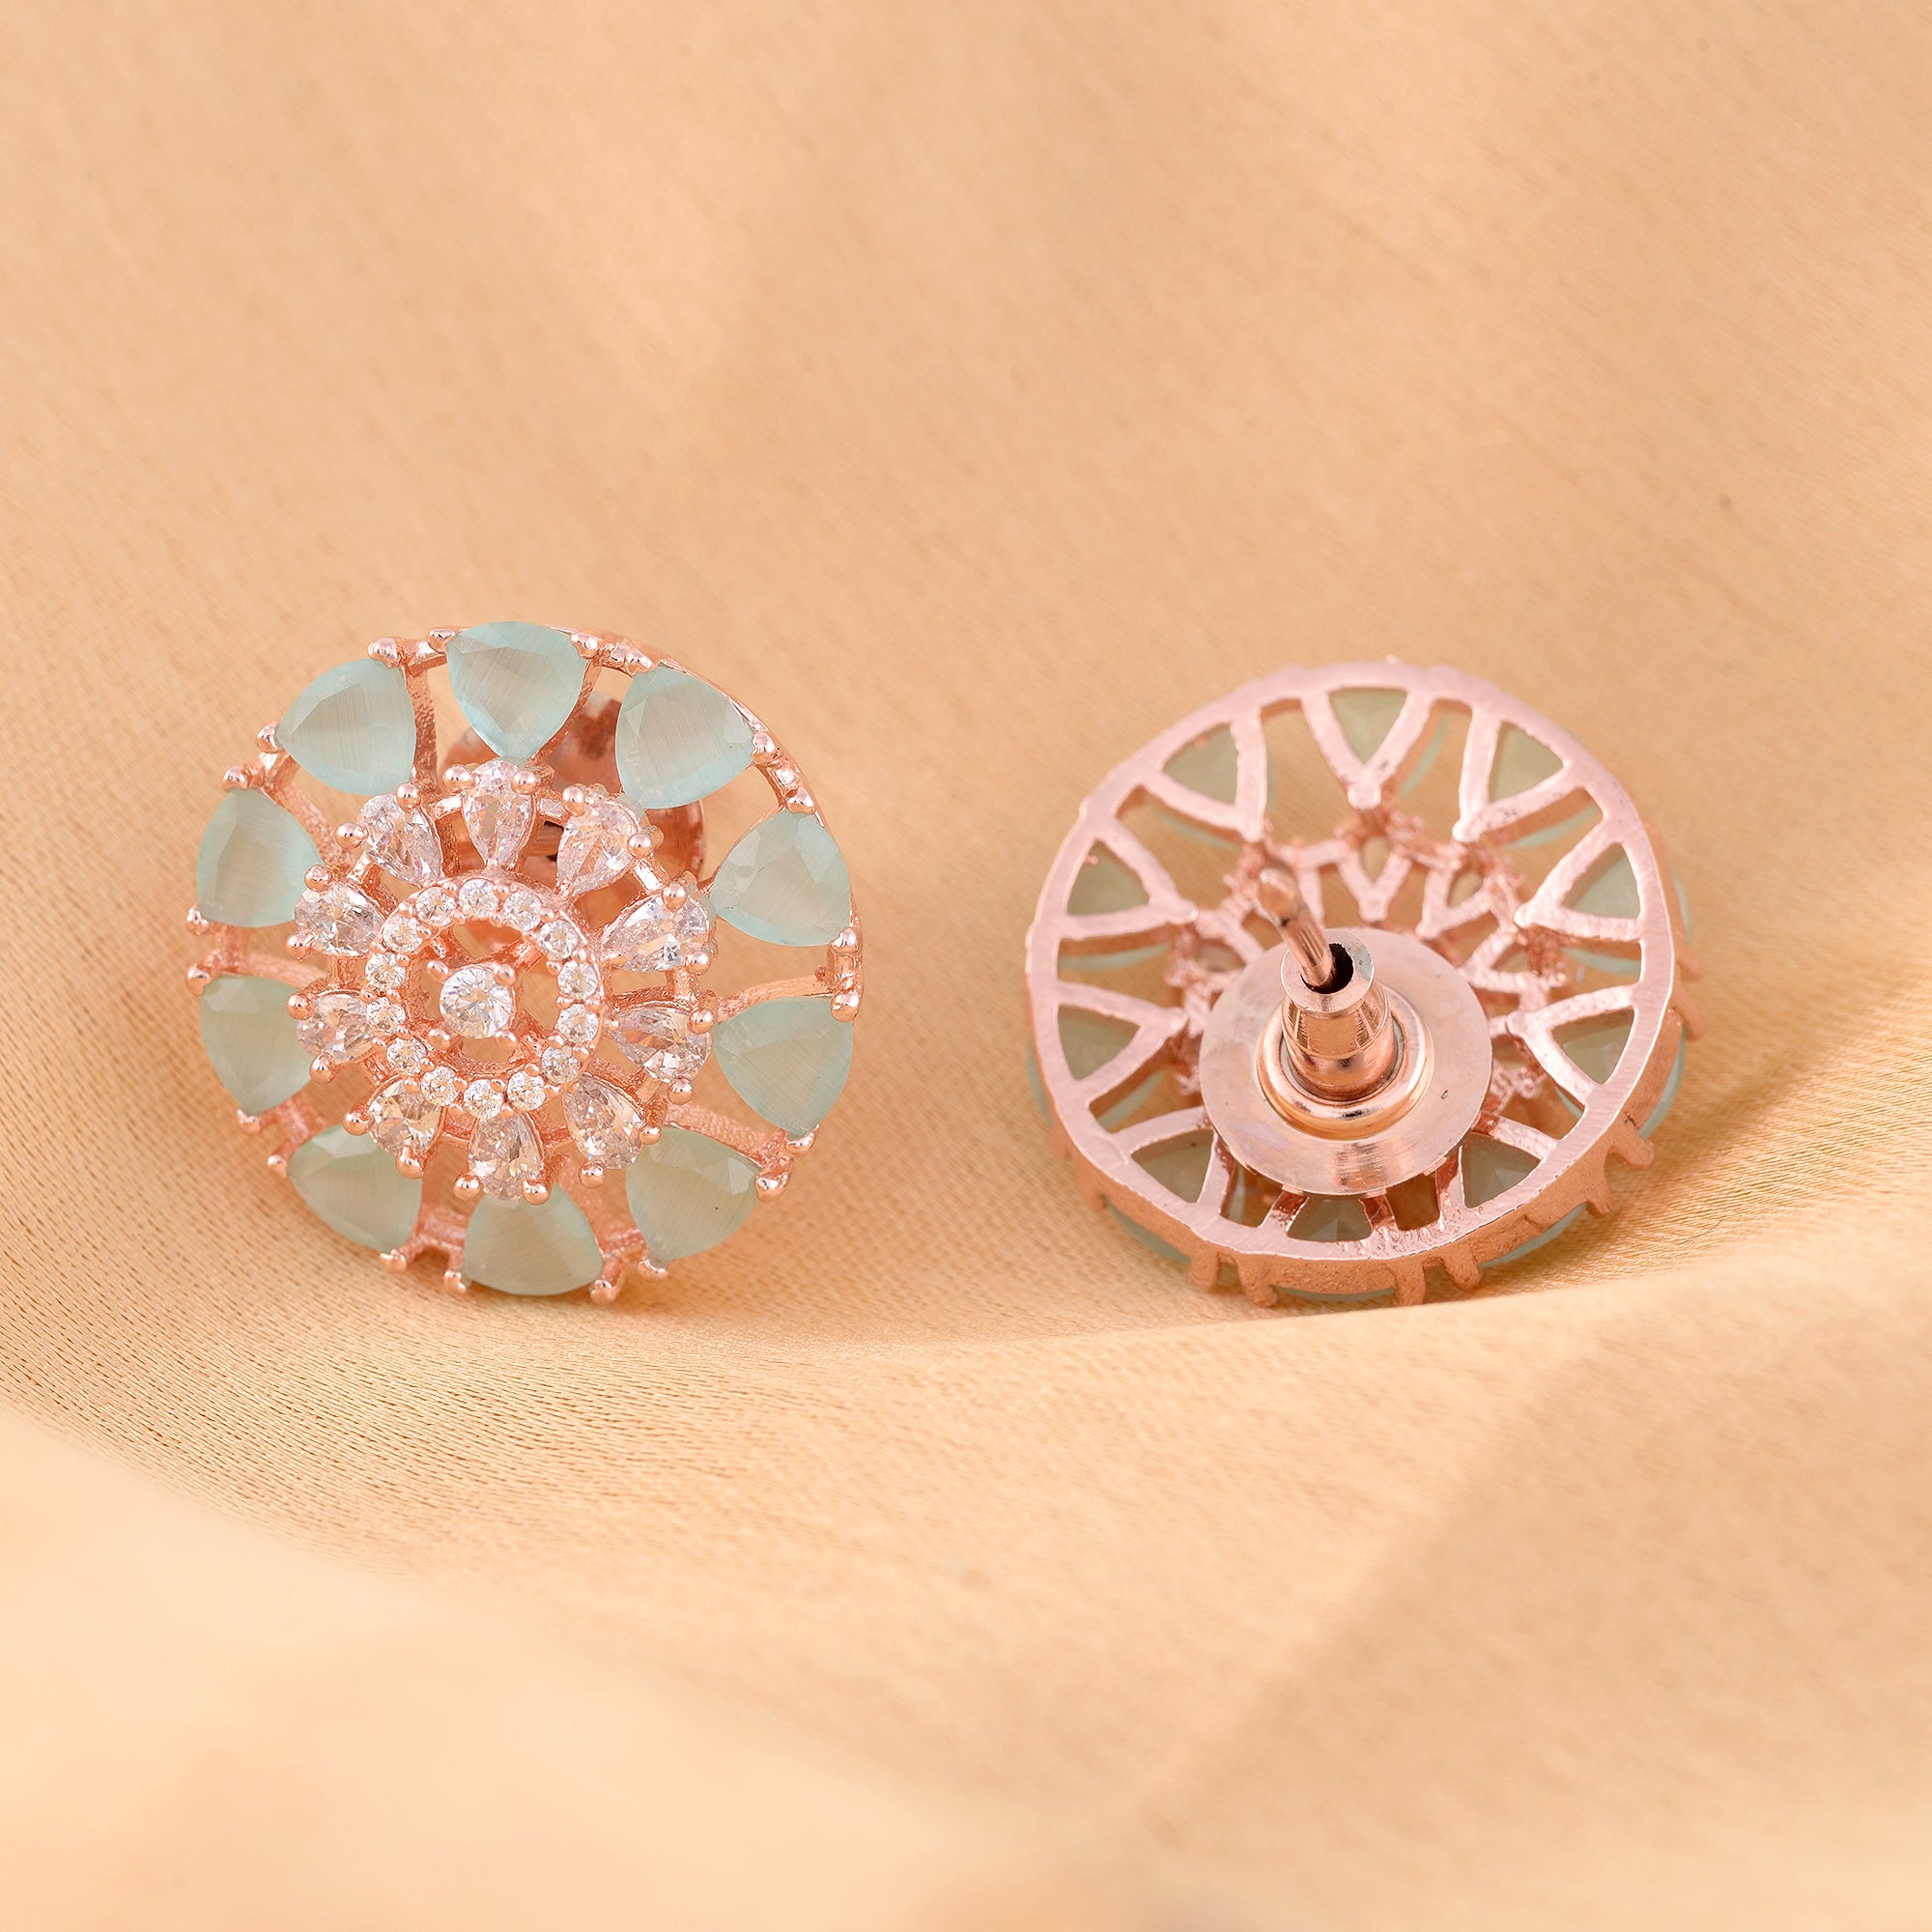 Subtle Light Blue Tops Turquoise Studs Ad Handcrafted Rose Gold Plated Earrings for Women and Girls - Saraf RS Jewellery